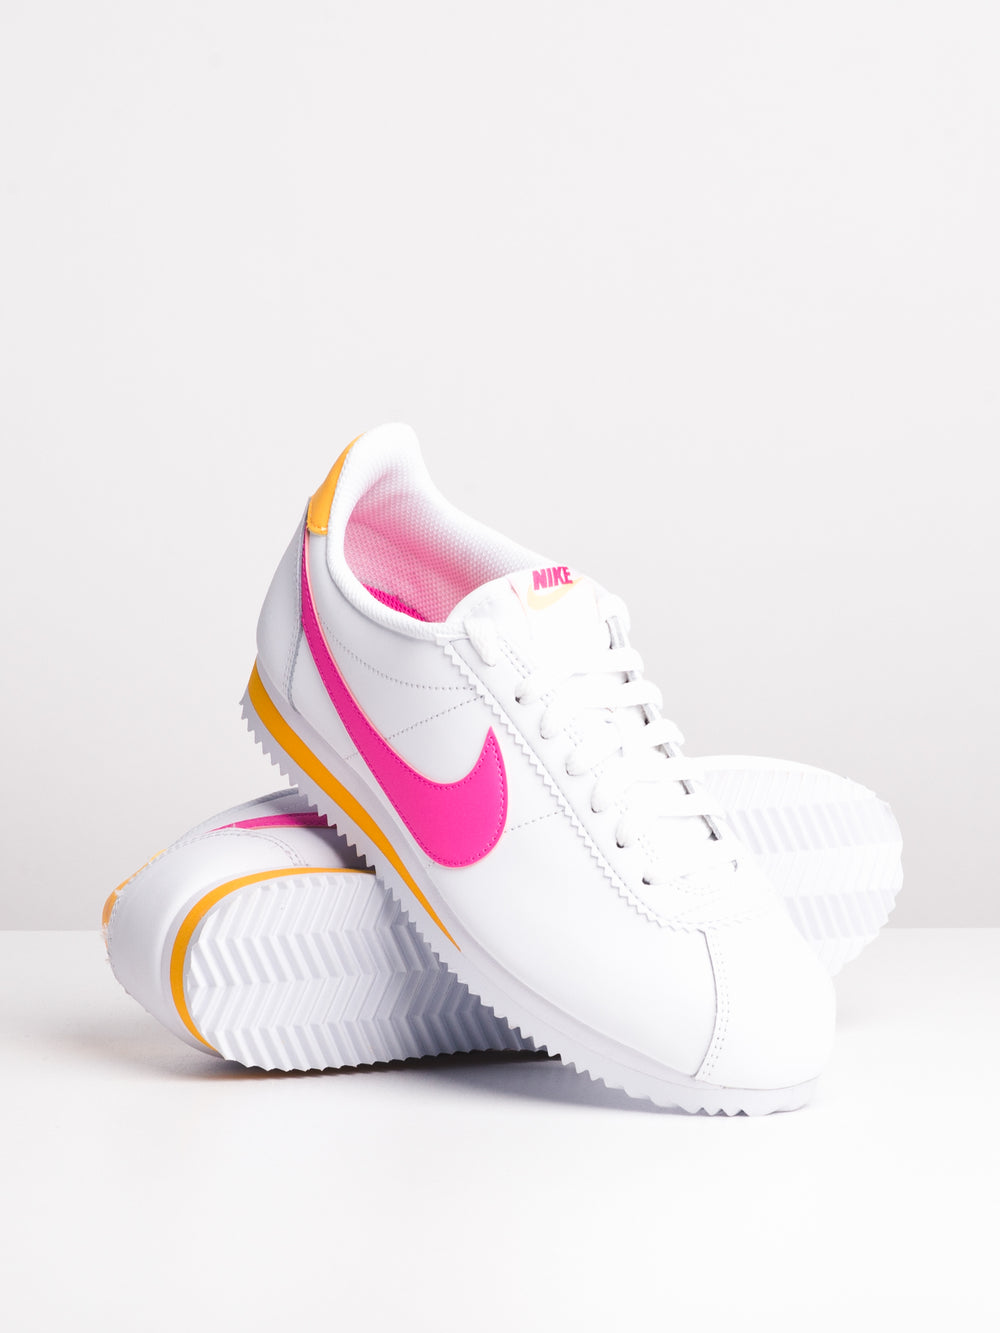 pink and yellow nike cortez